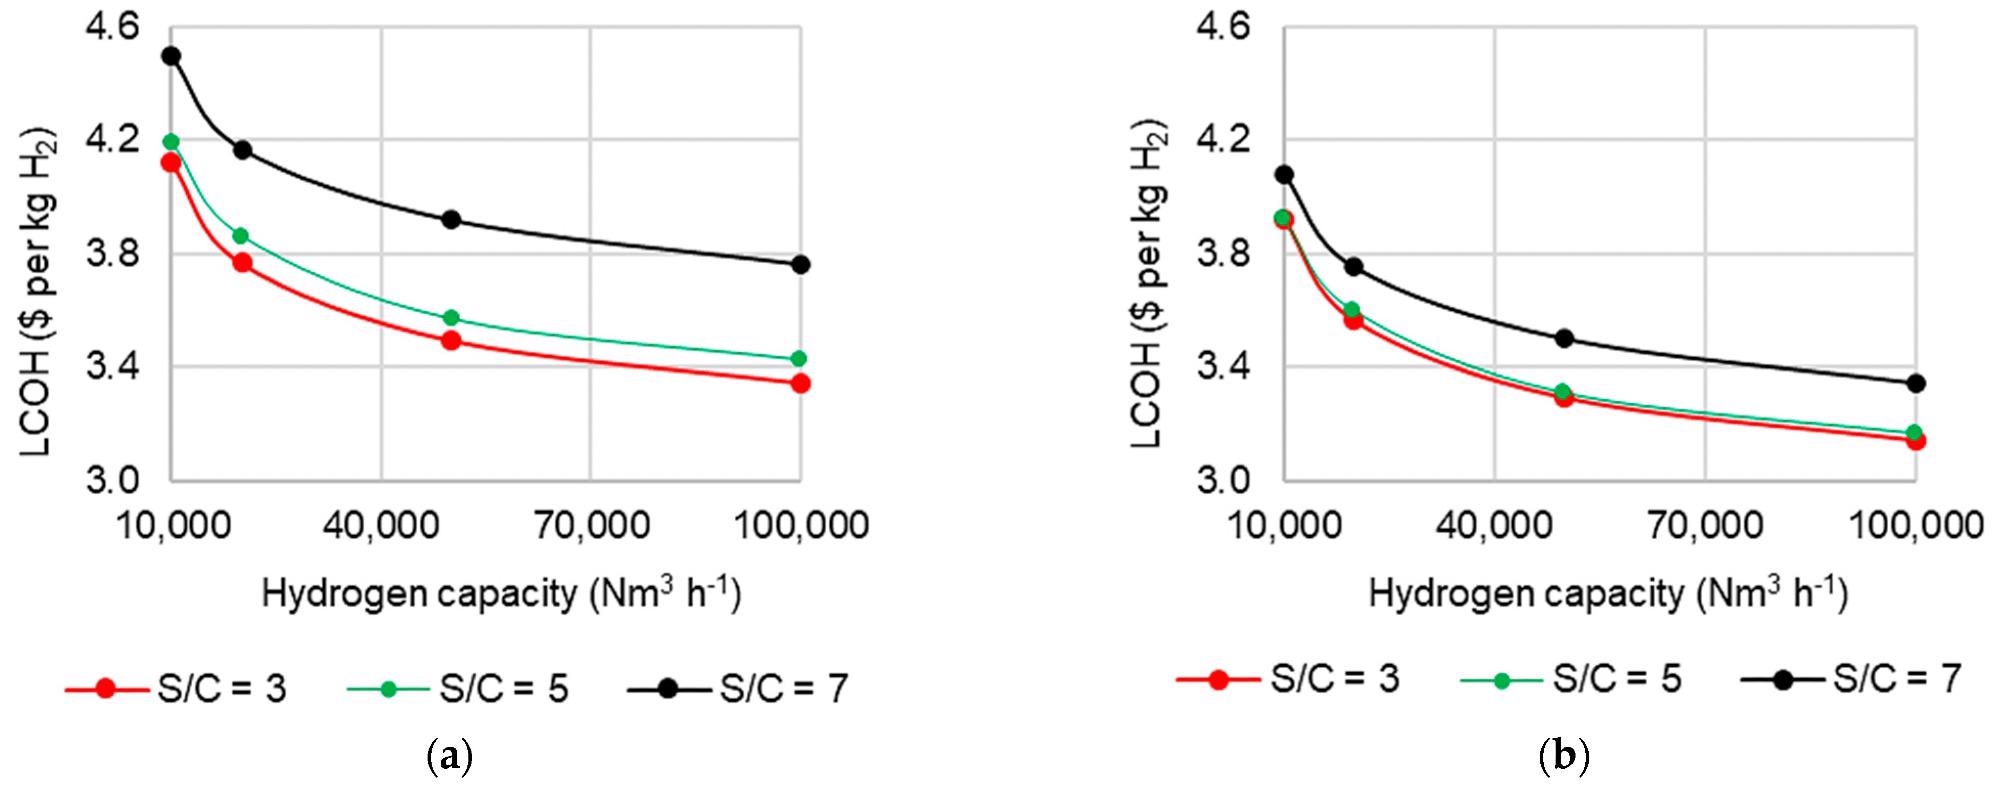 Effect of S/C ratio and capacity on levelized cost of hydrogen in C-SR at 30 bar and 900 °C (a) without steam export and (b) with steam export.